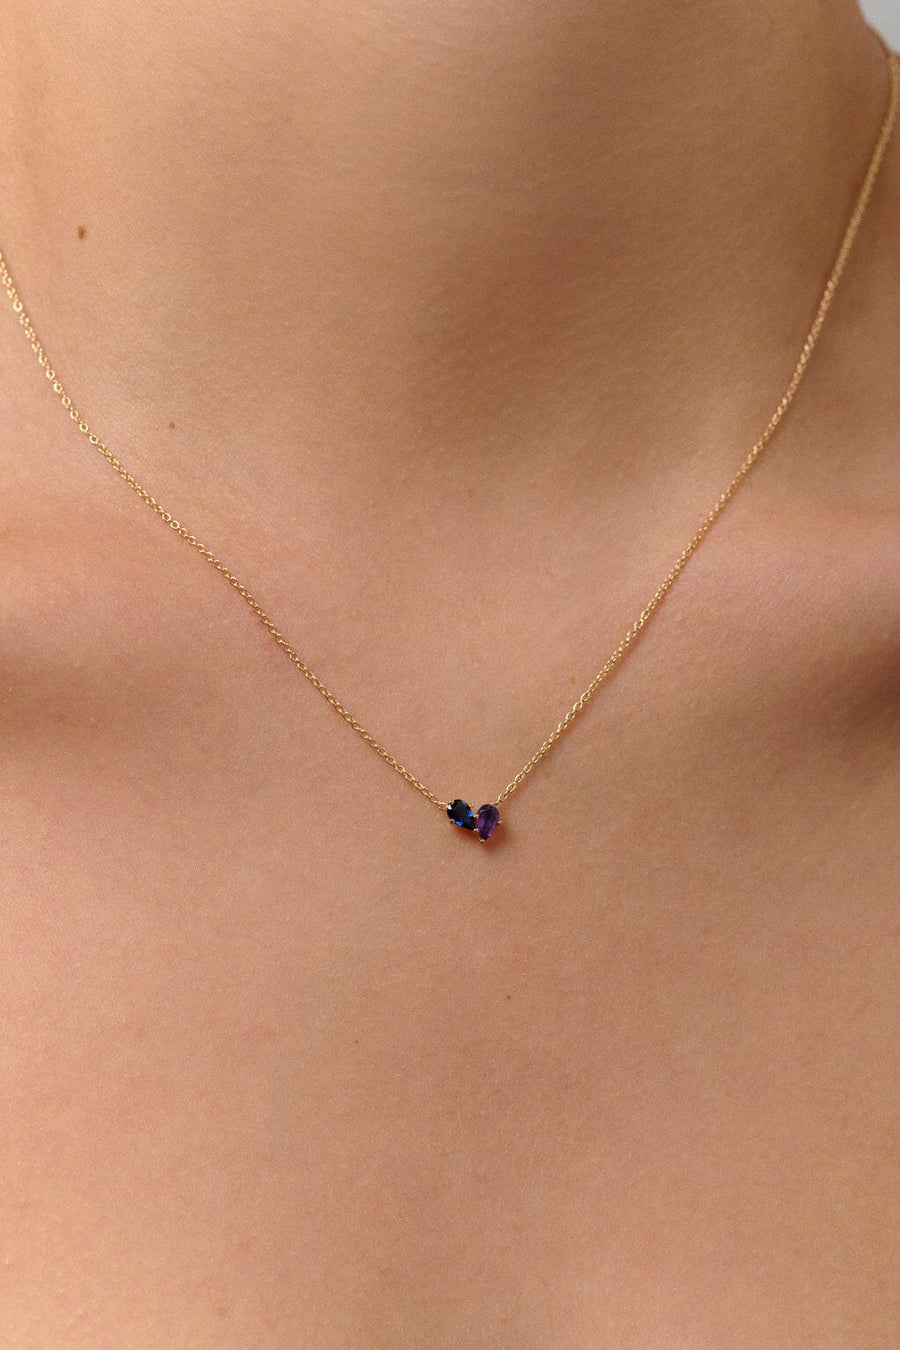 The Other Half Birthstone Necklace